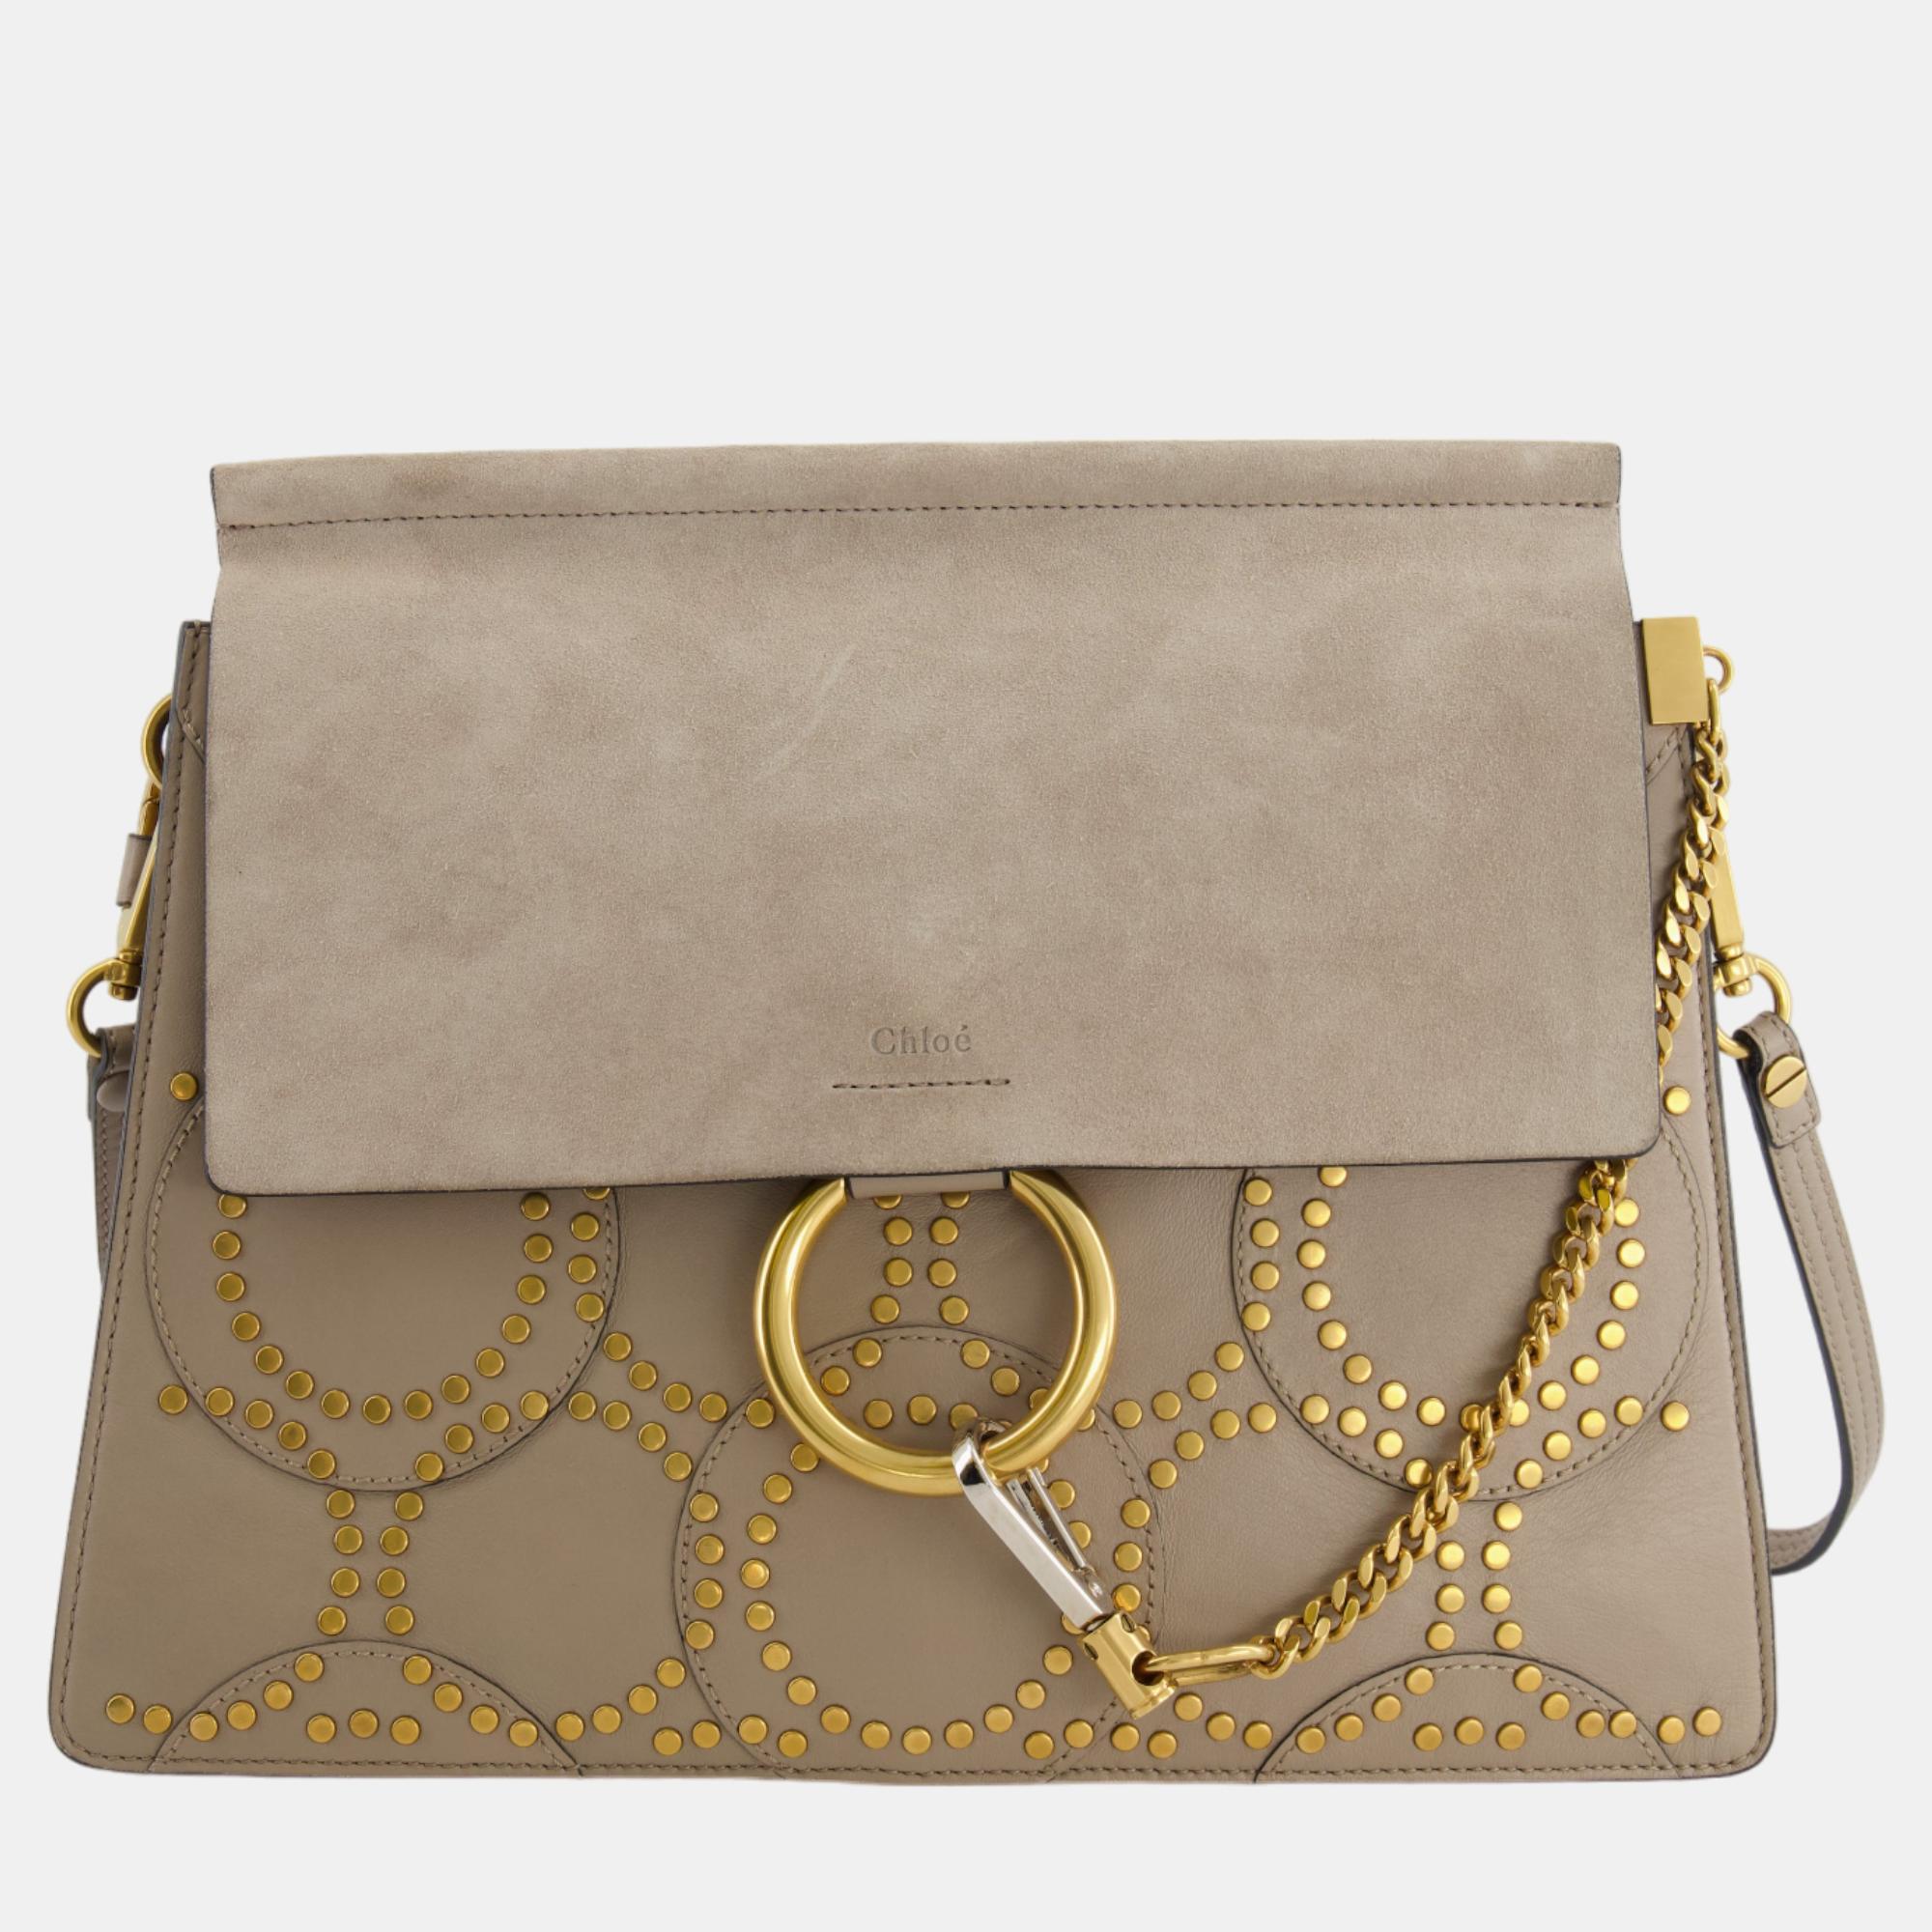 Pre-owned Chloé Beige Suede Leather Studded Faye Shoulder Bag With Gold Hardware